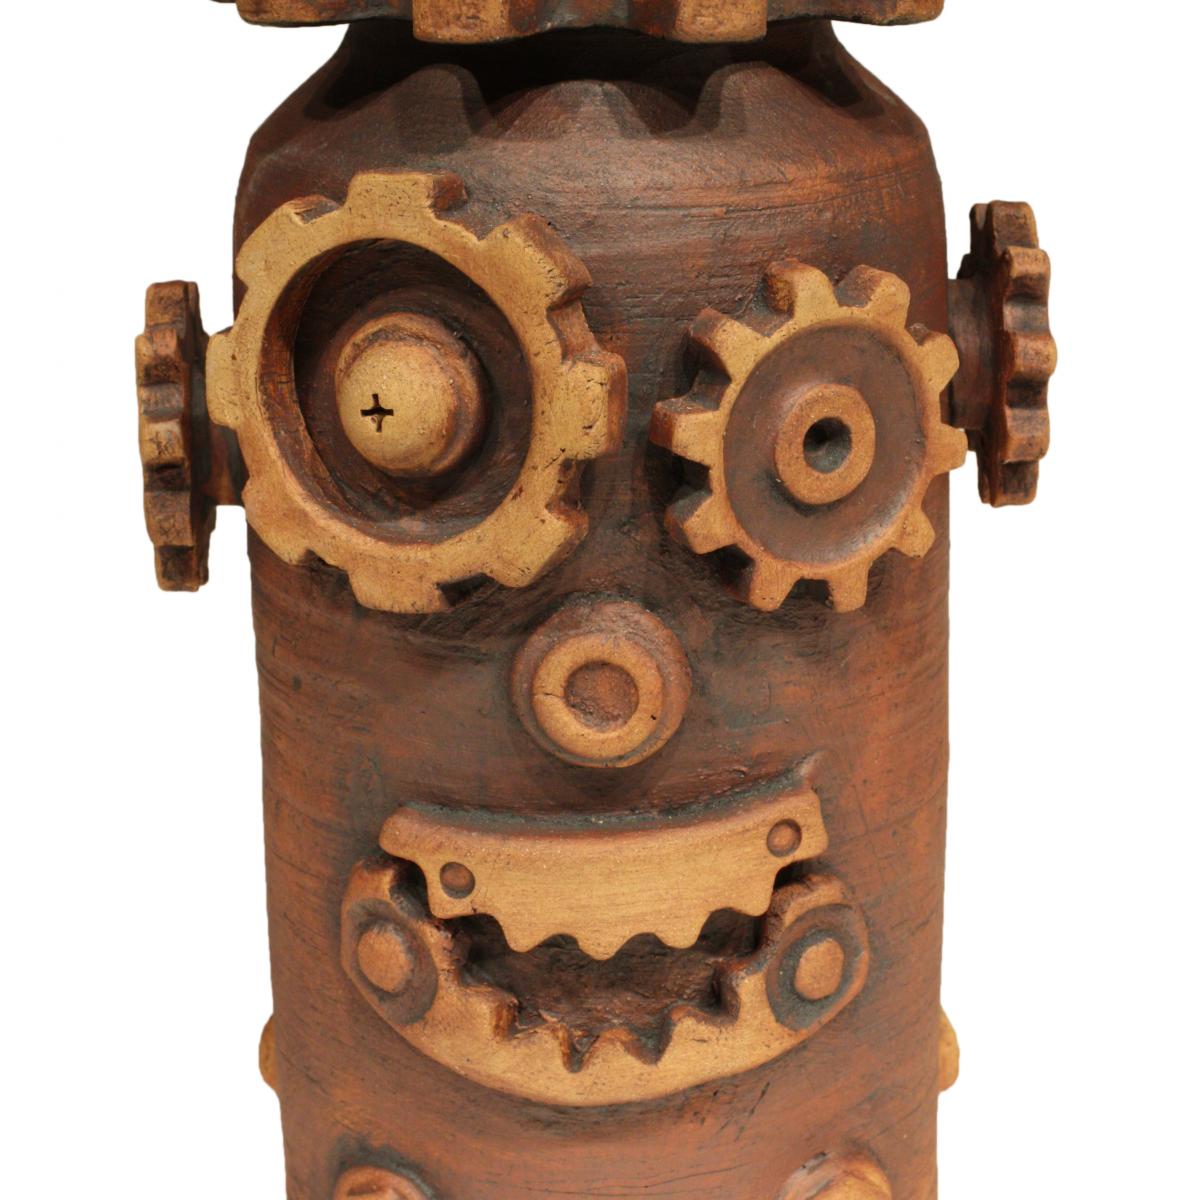 Gears on a jar forming a robotic face.